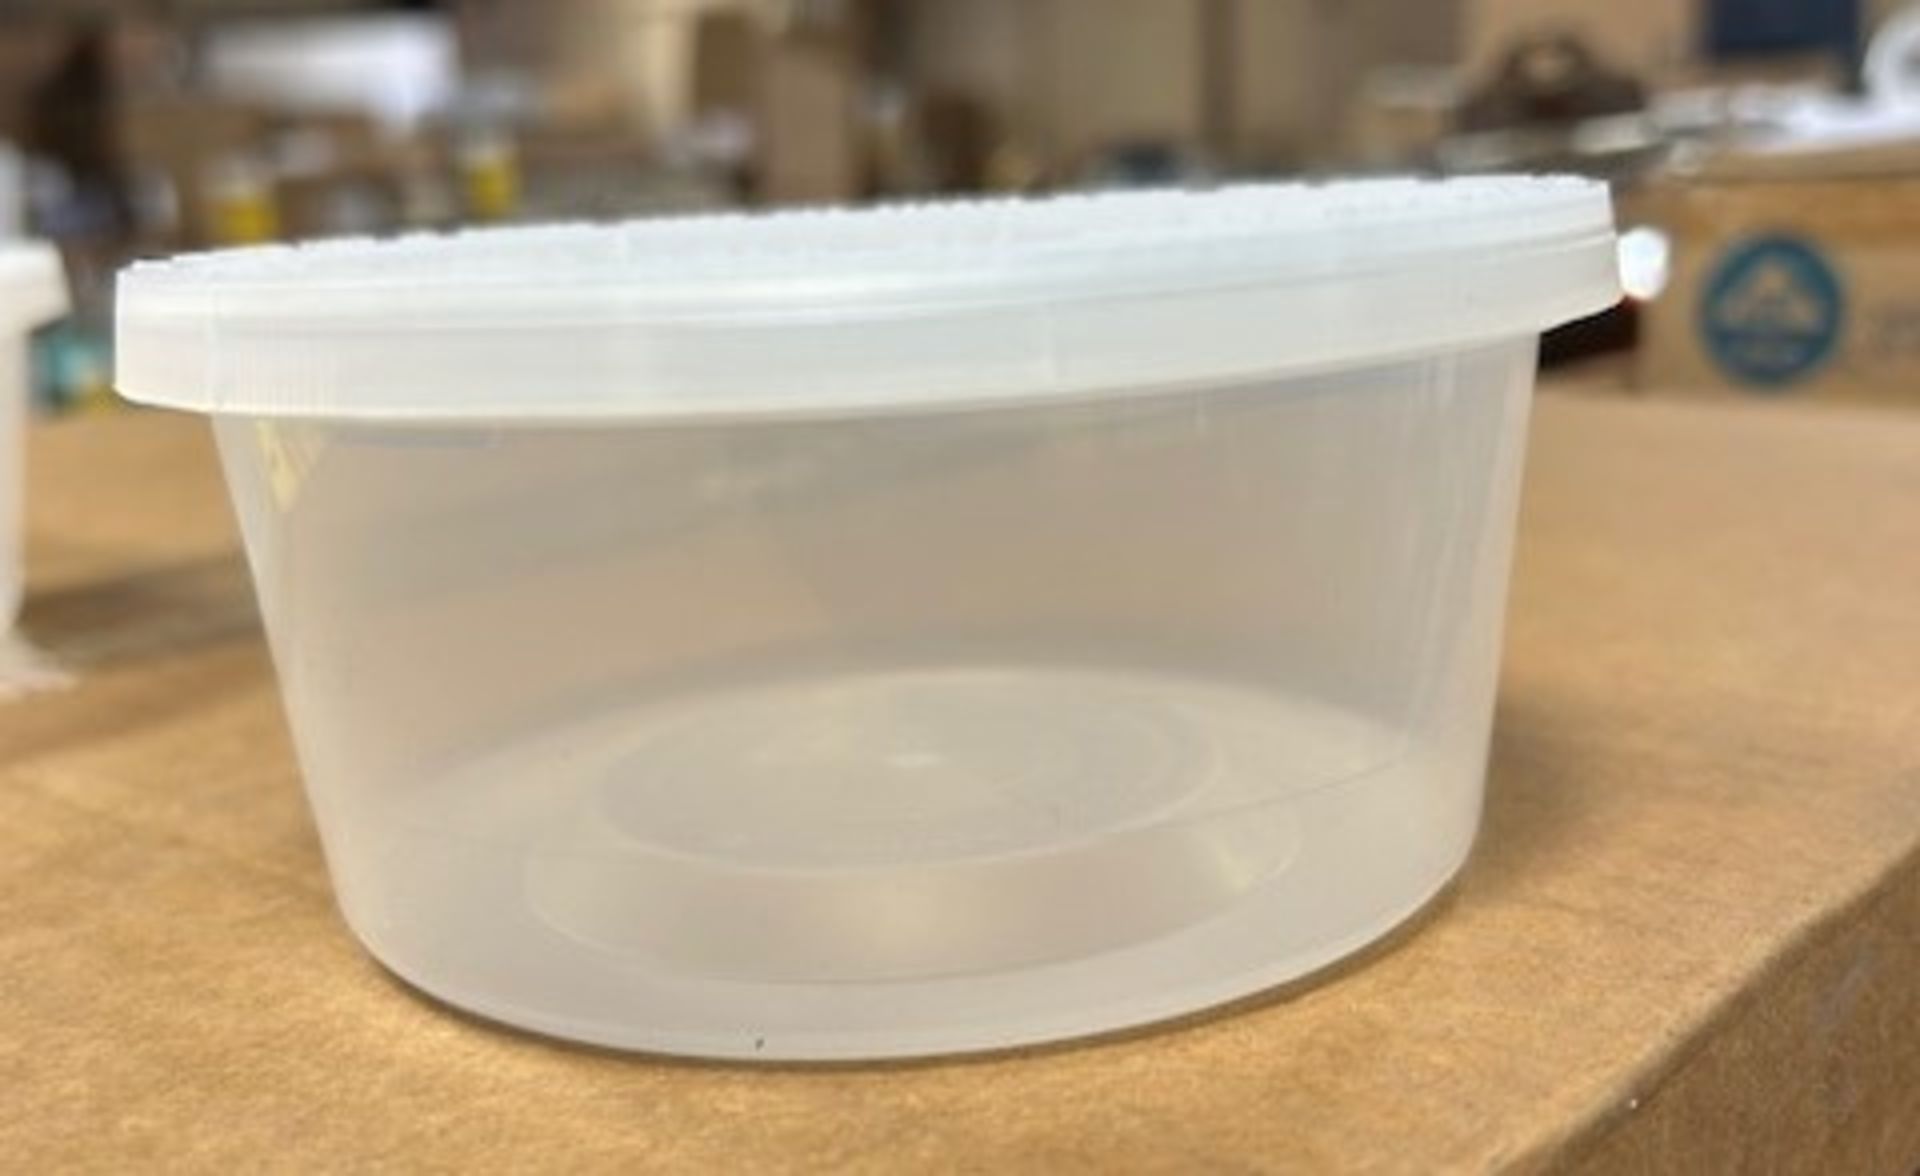 LOT - (1000) 8 Oz. Deli Container with Lid